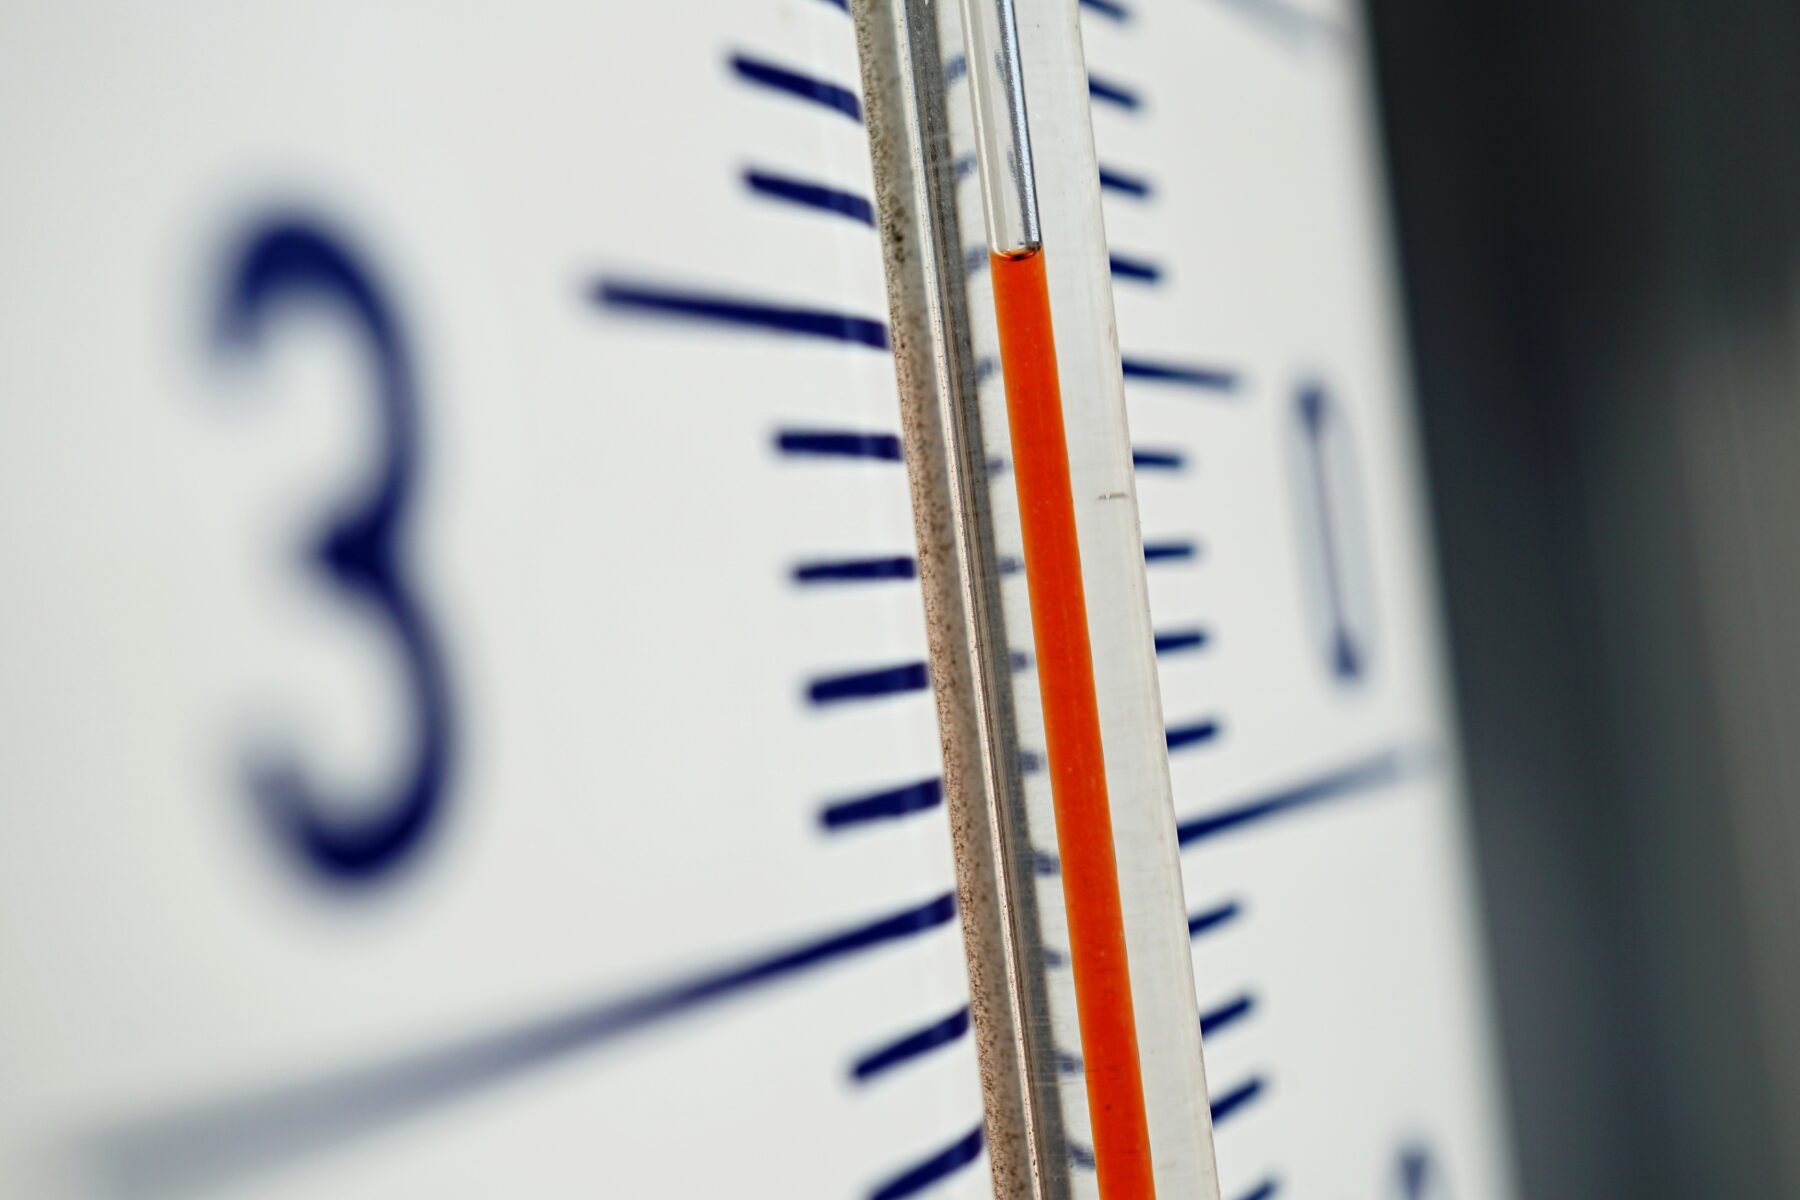 Very close up image of a thermometer showing rising temperatures